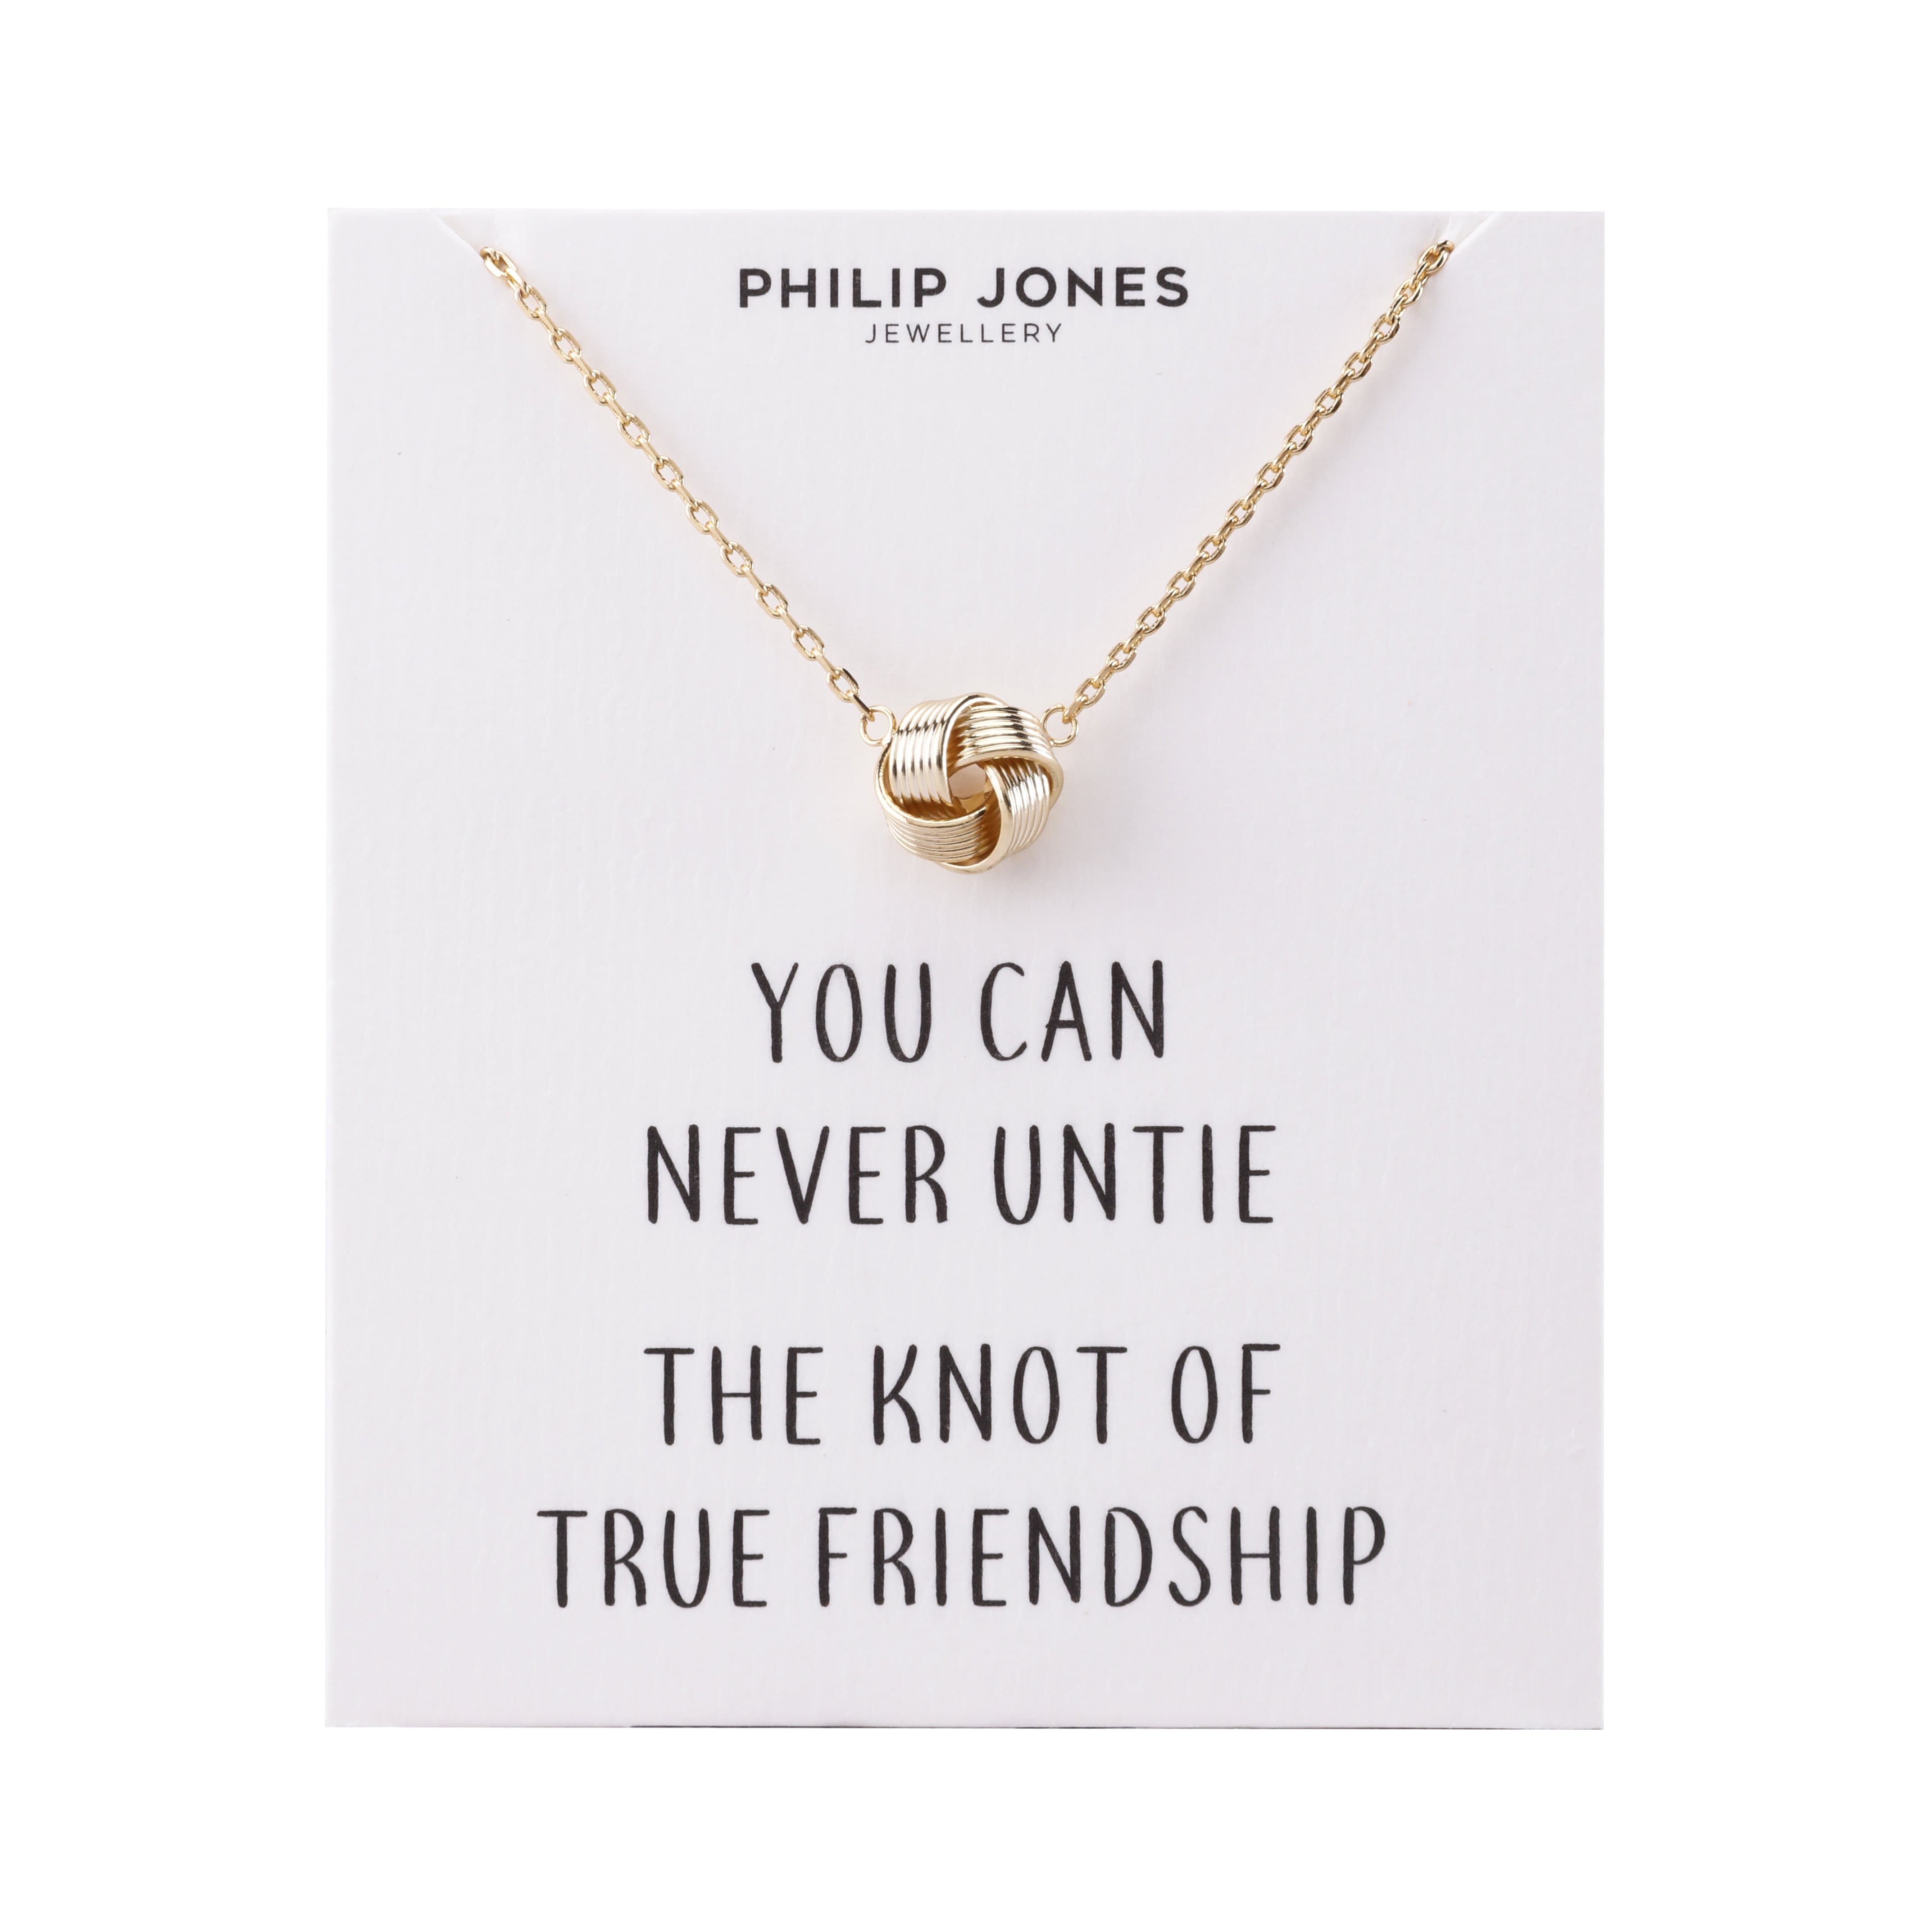 Gold Plated Love Knot Necklace with Quote Card by Philip Jones Jewellery